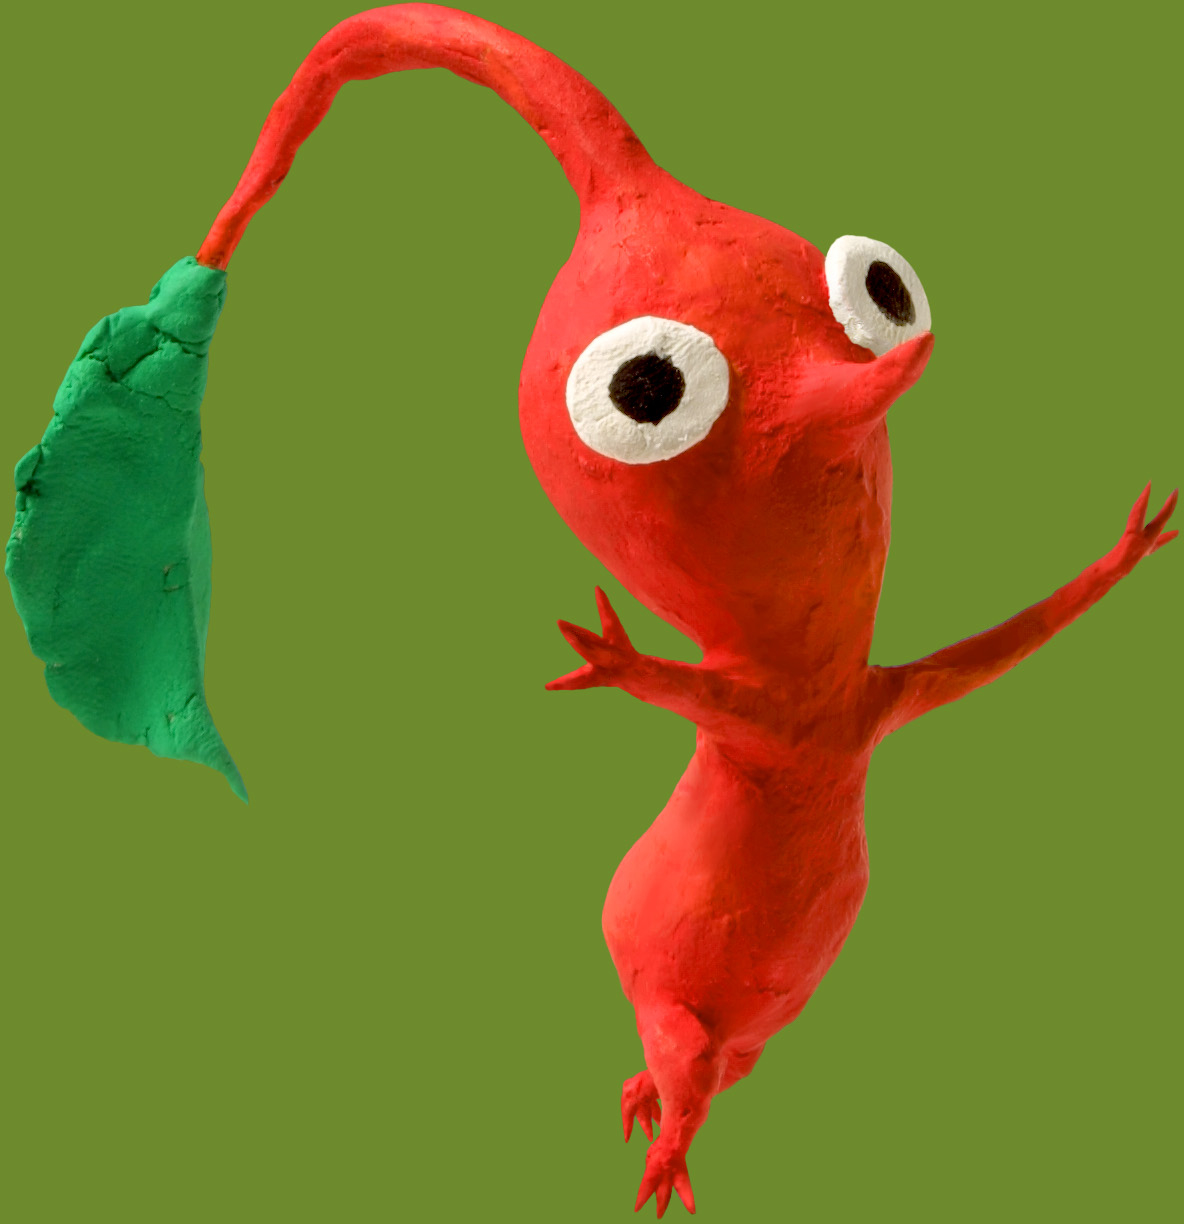 A clay model of a Red Pikmin.